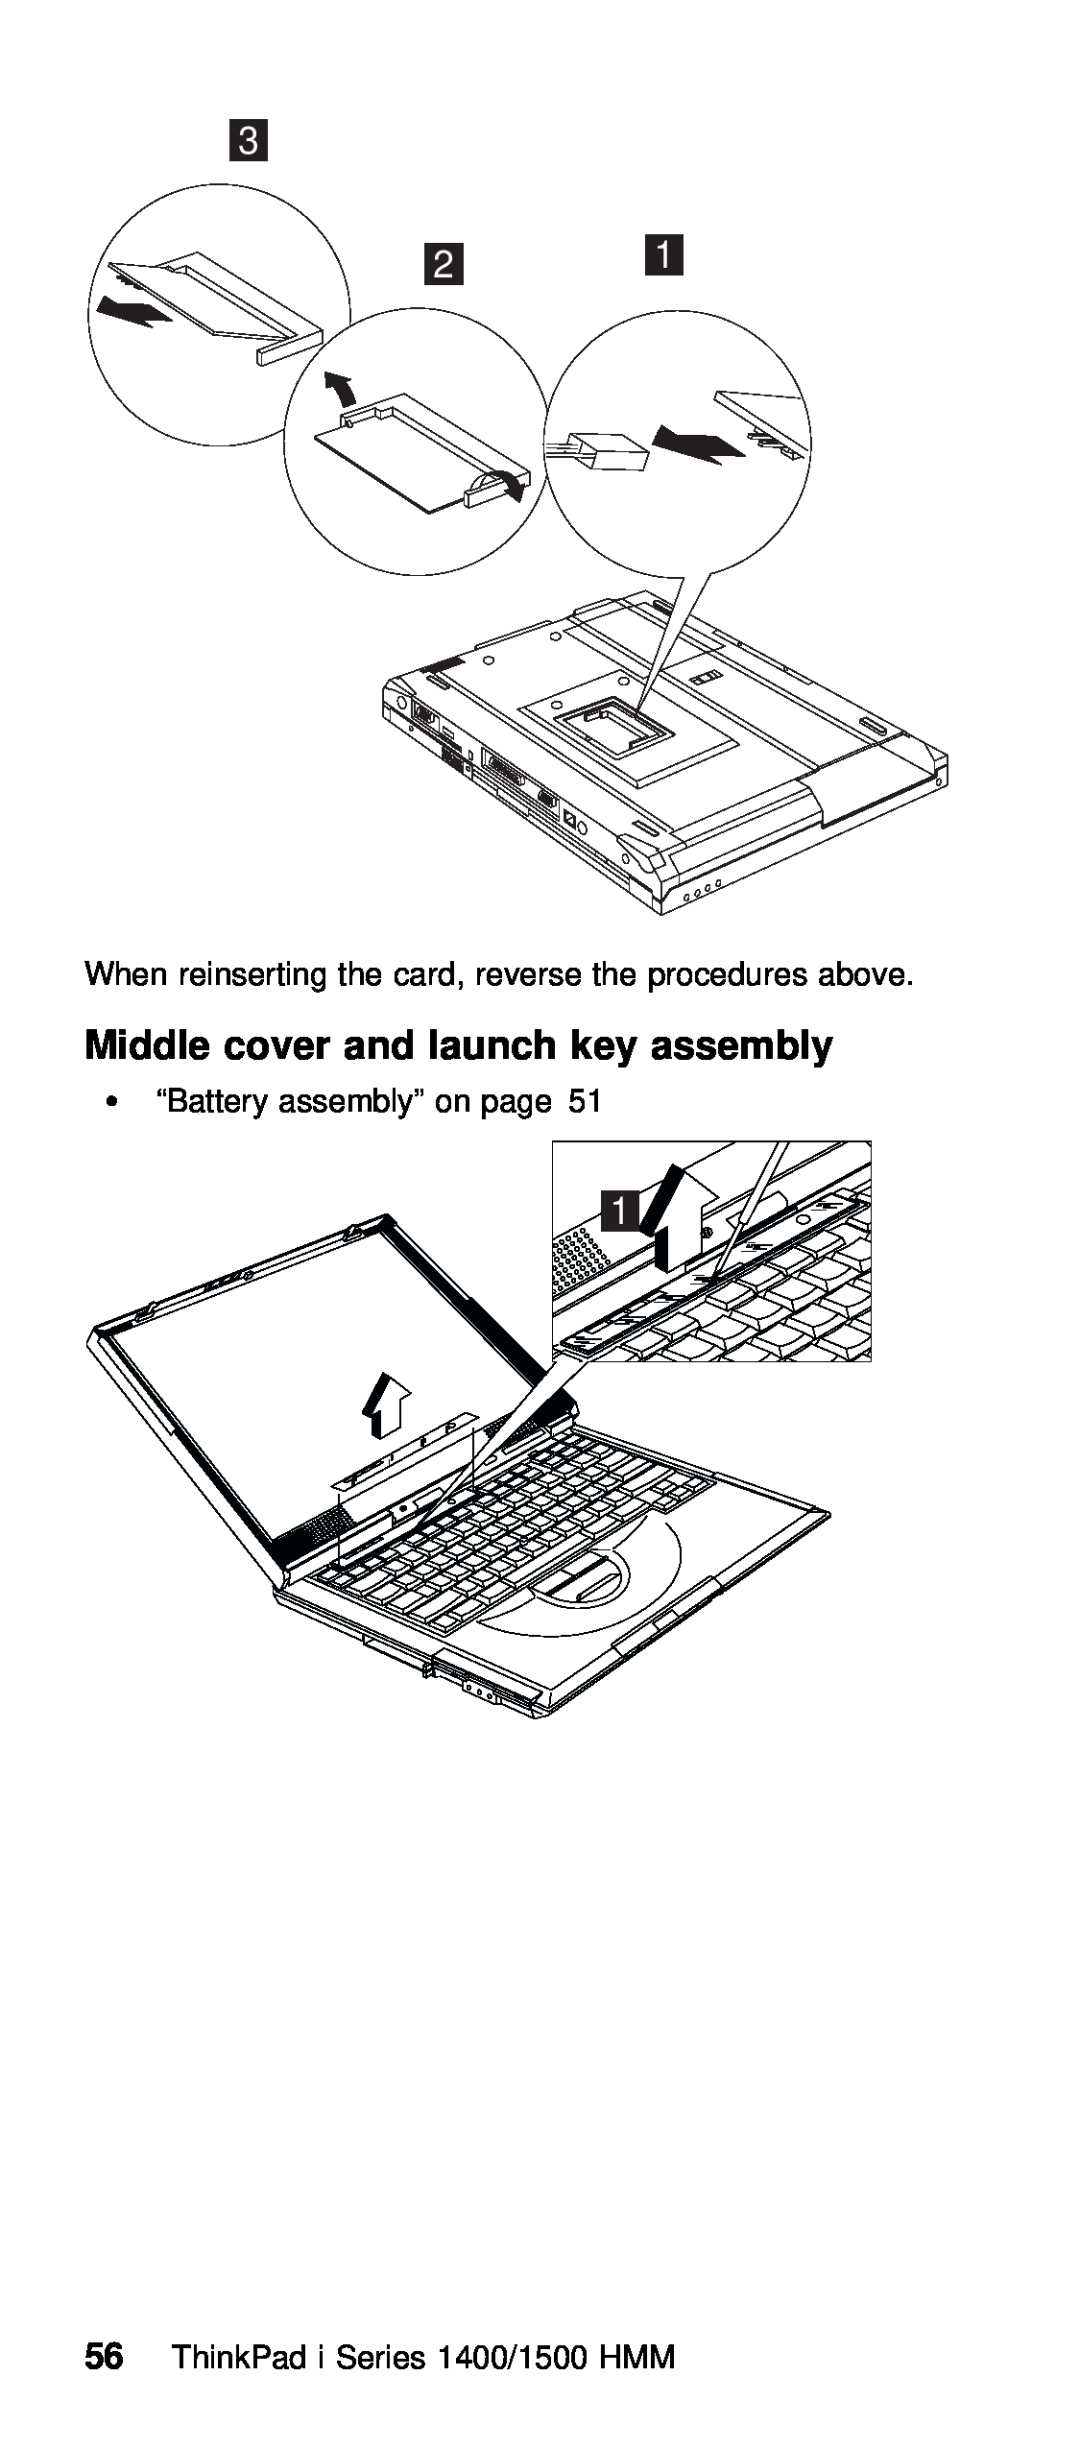 IBM Series 1500, Series 1400 manual Middle cover and launch key assembly, When reinserting the card, reverse the procedure 